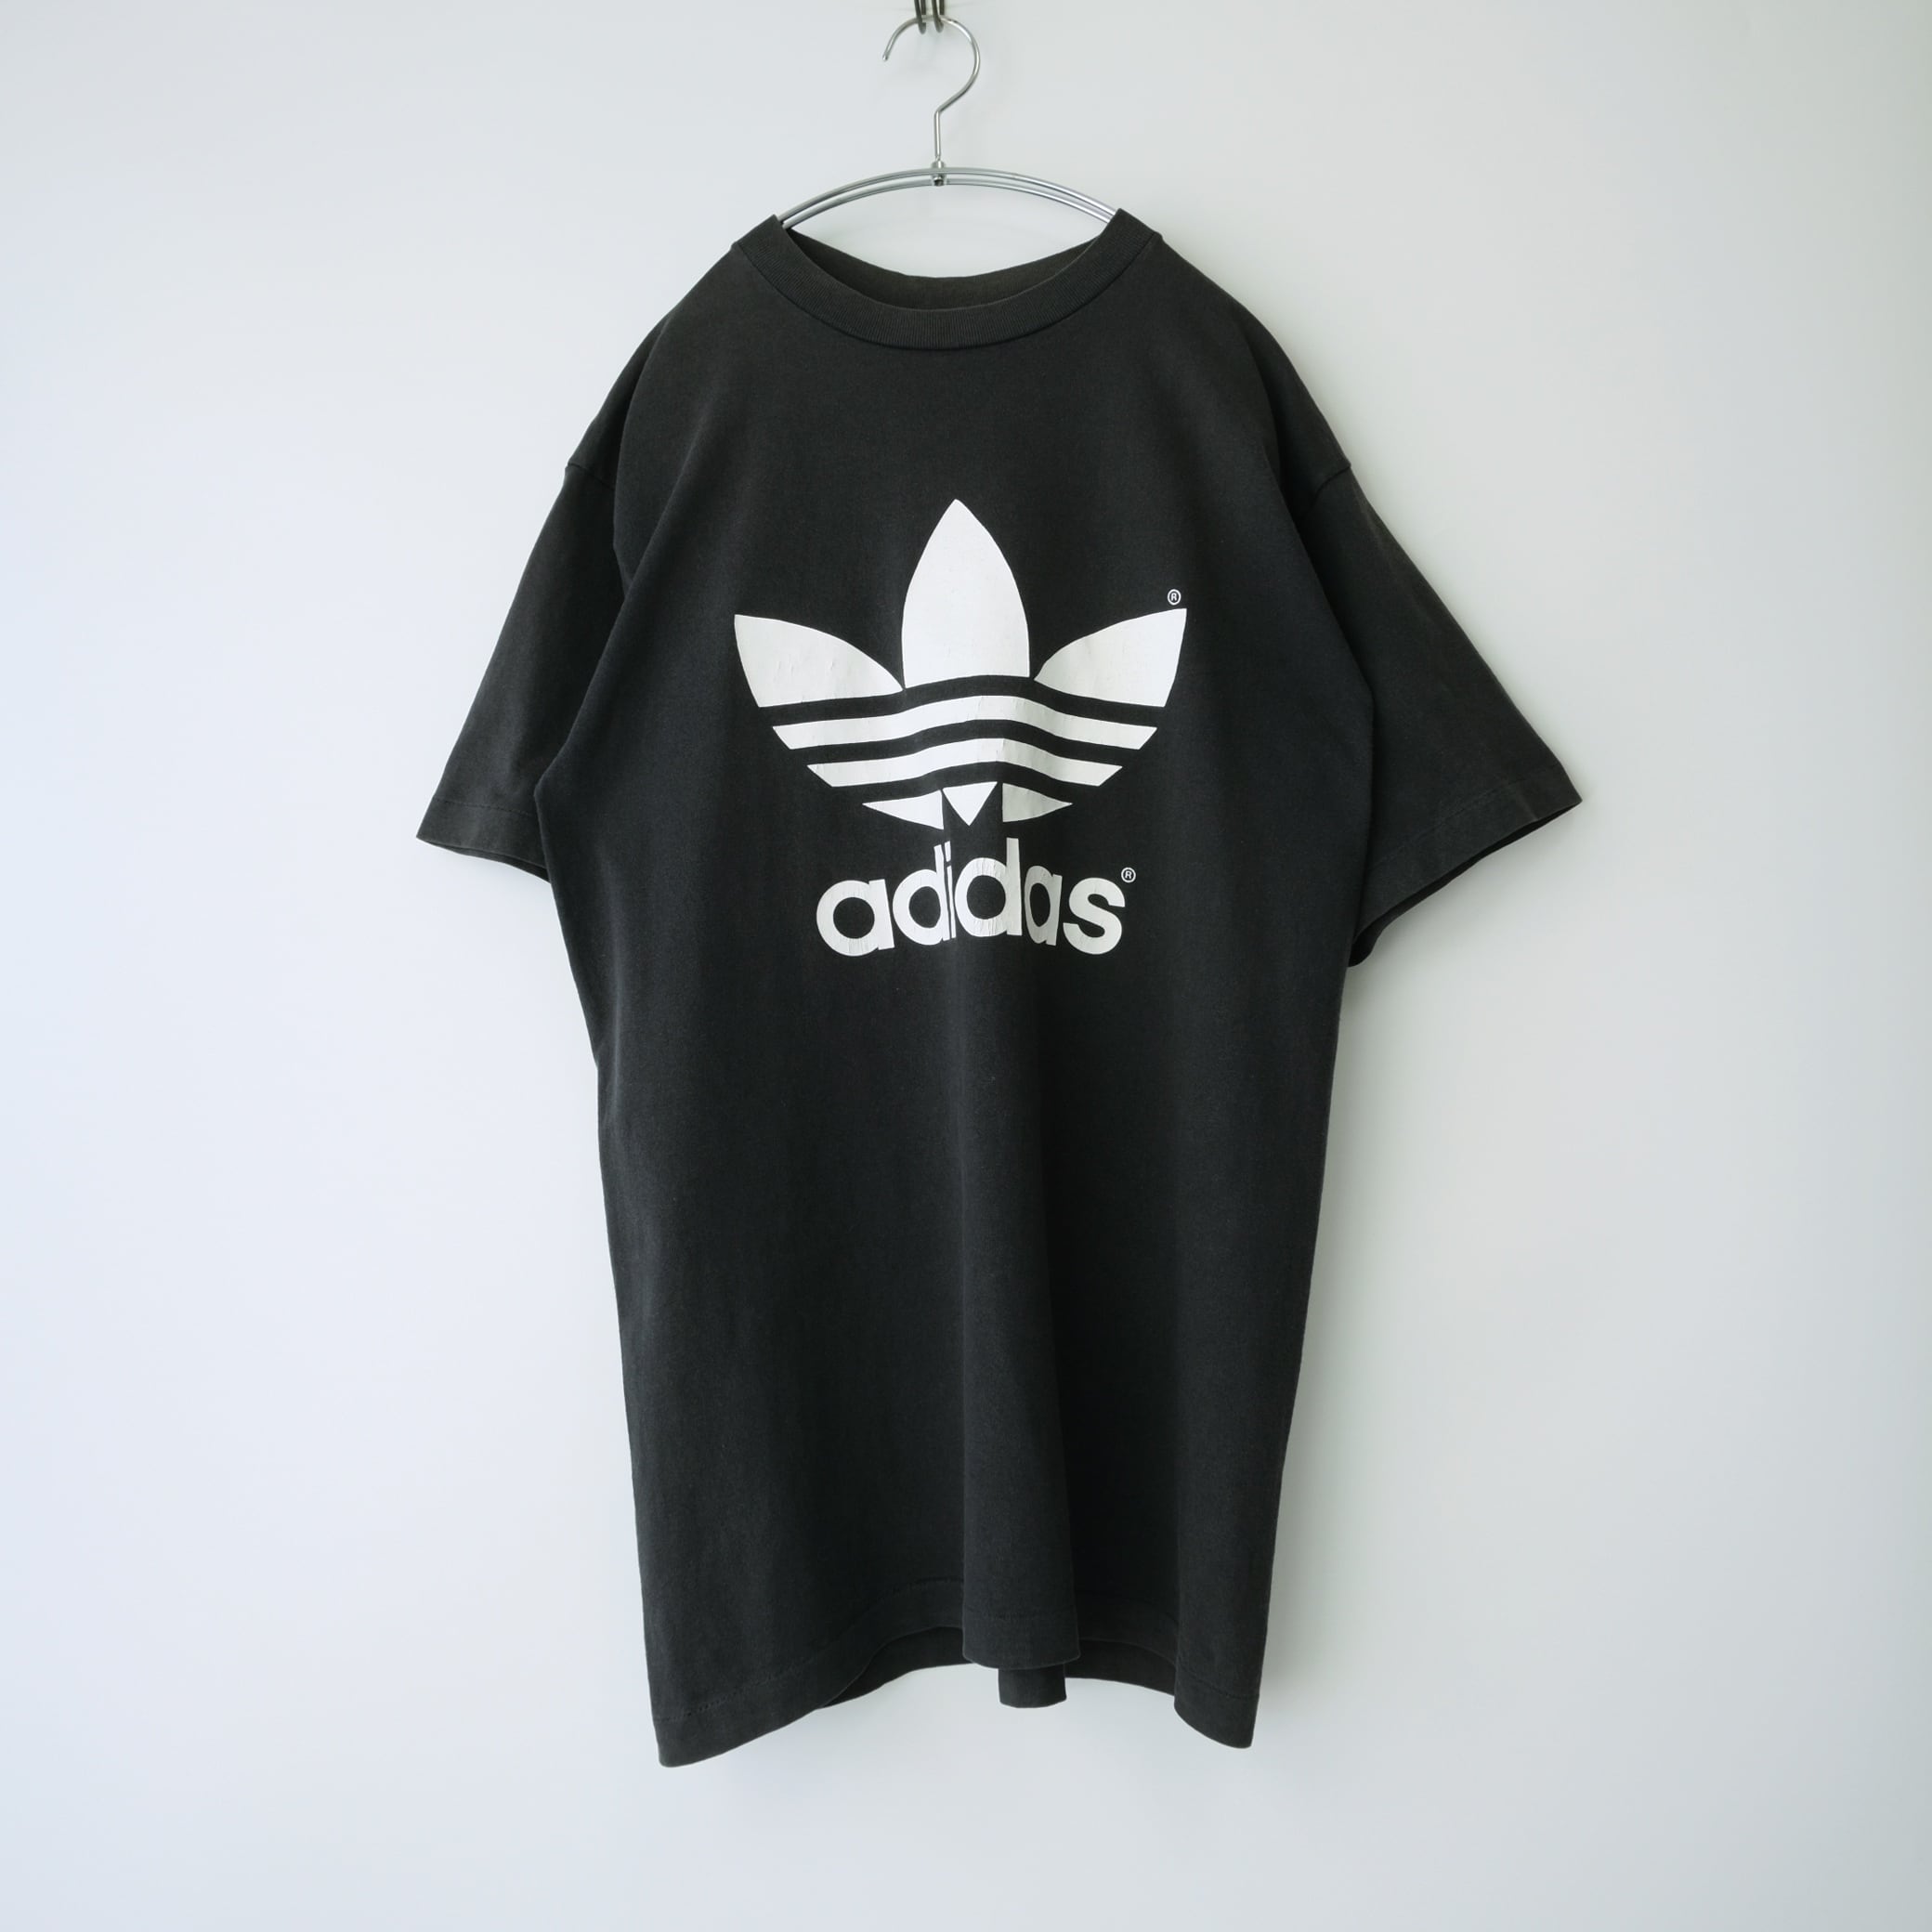 【adidas】90's USA製 プリントロゴ半袖Tシャツ 黒 M | RE:FOUND powered by BASE